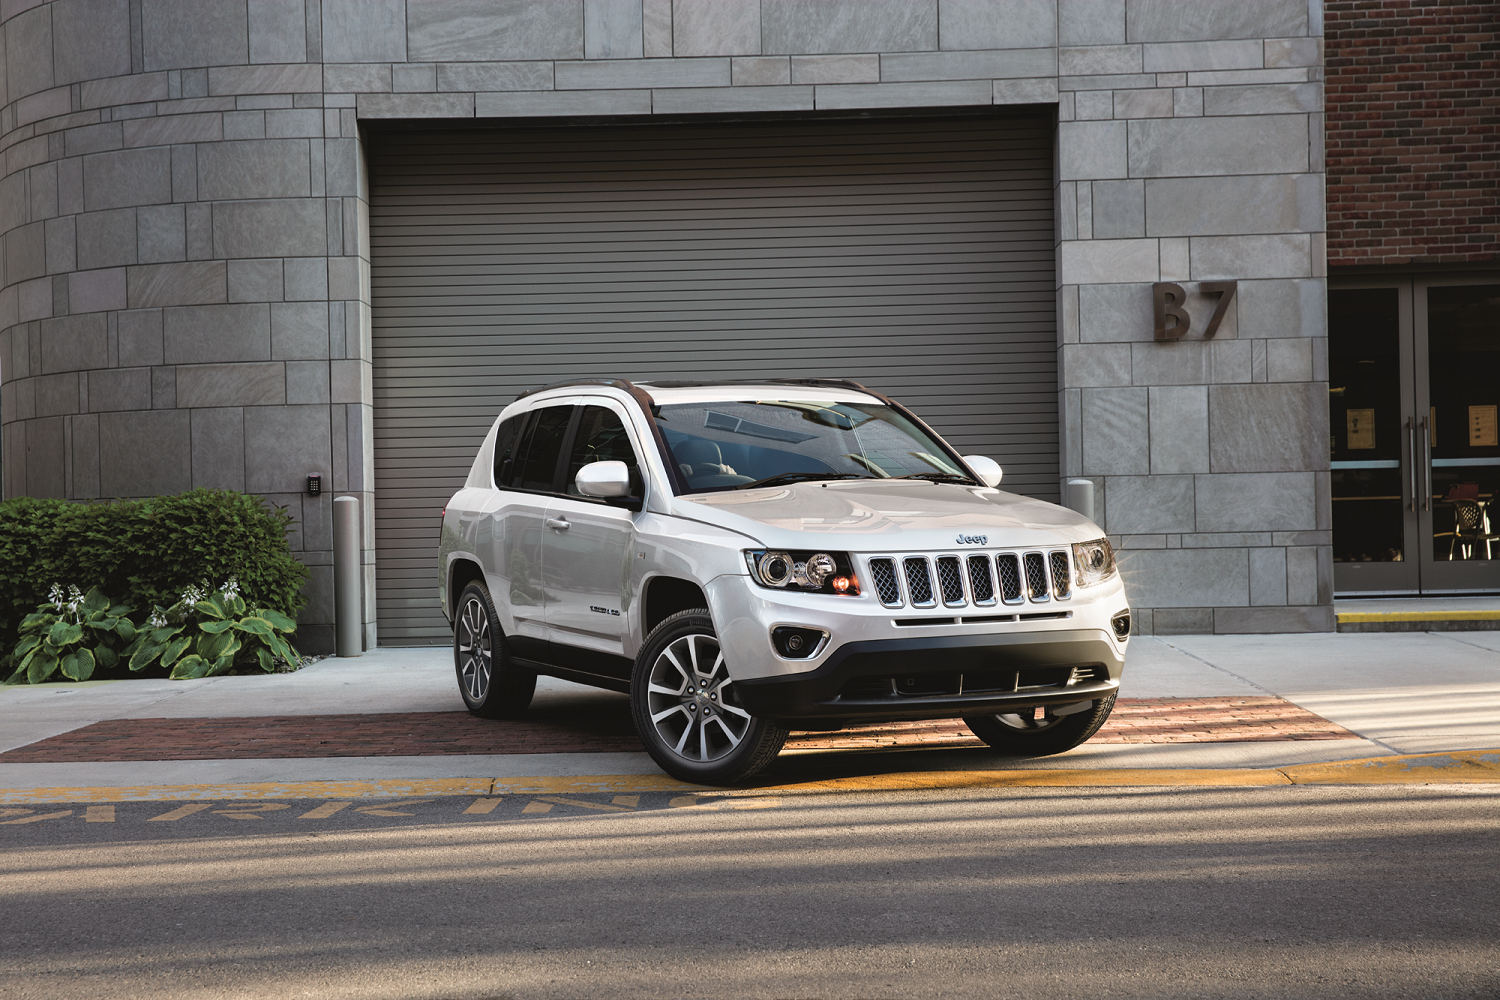 Used Jeep Compass near Wilkes-Barre PA
